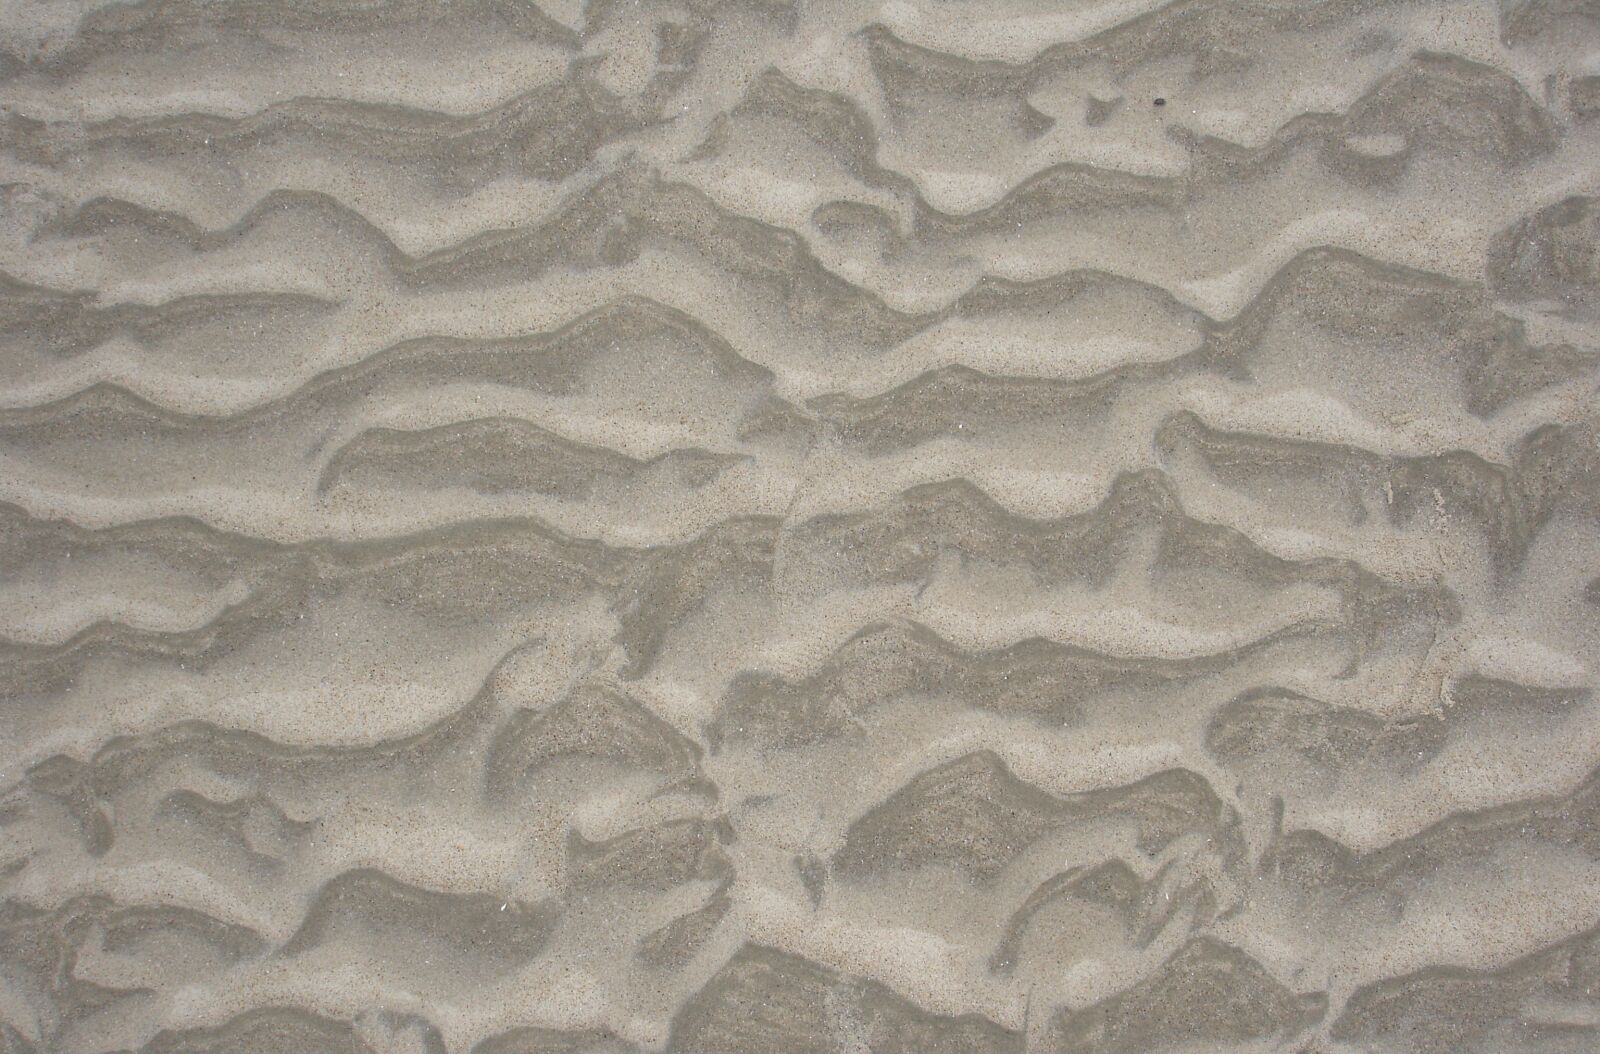 Sony DSC-P200 sample photo. Sand, the two, extraterrestrial photography